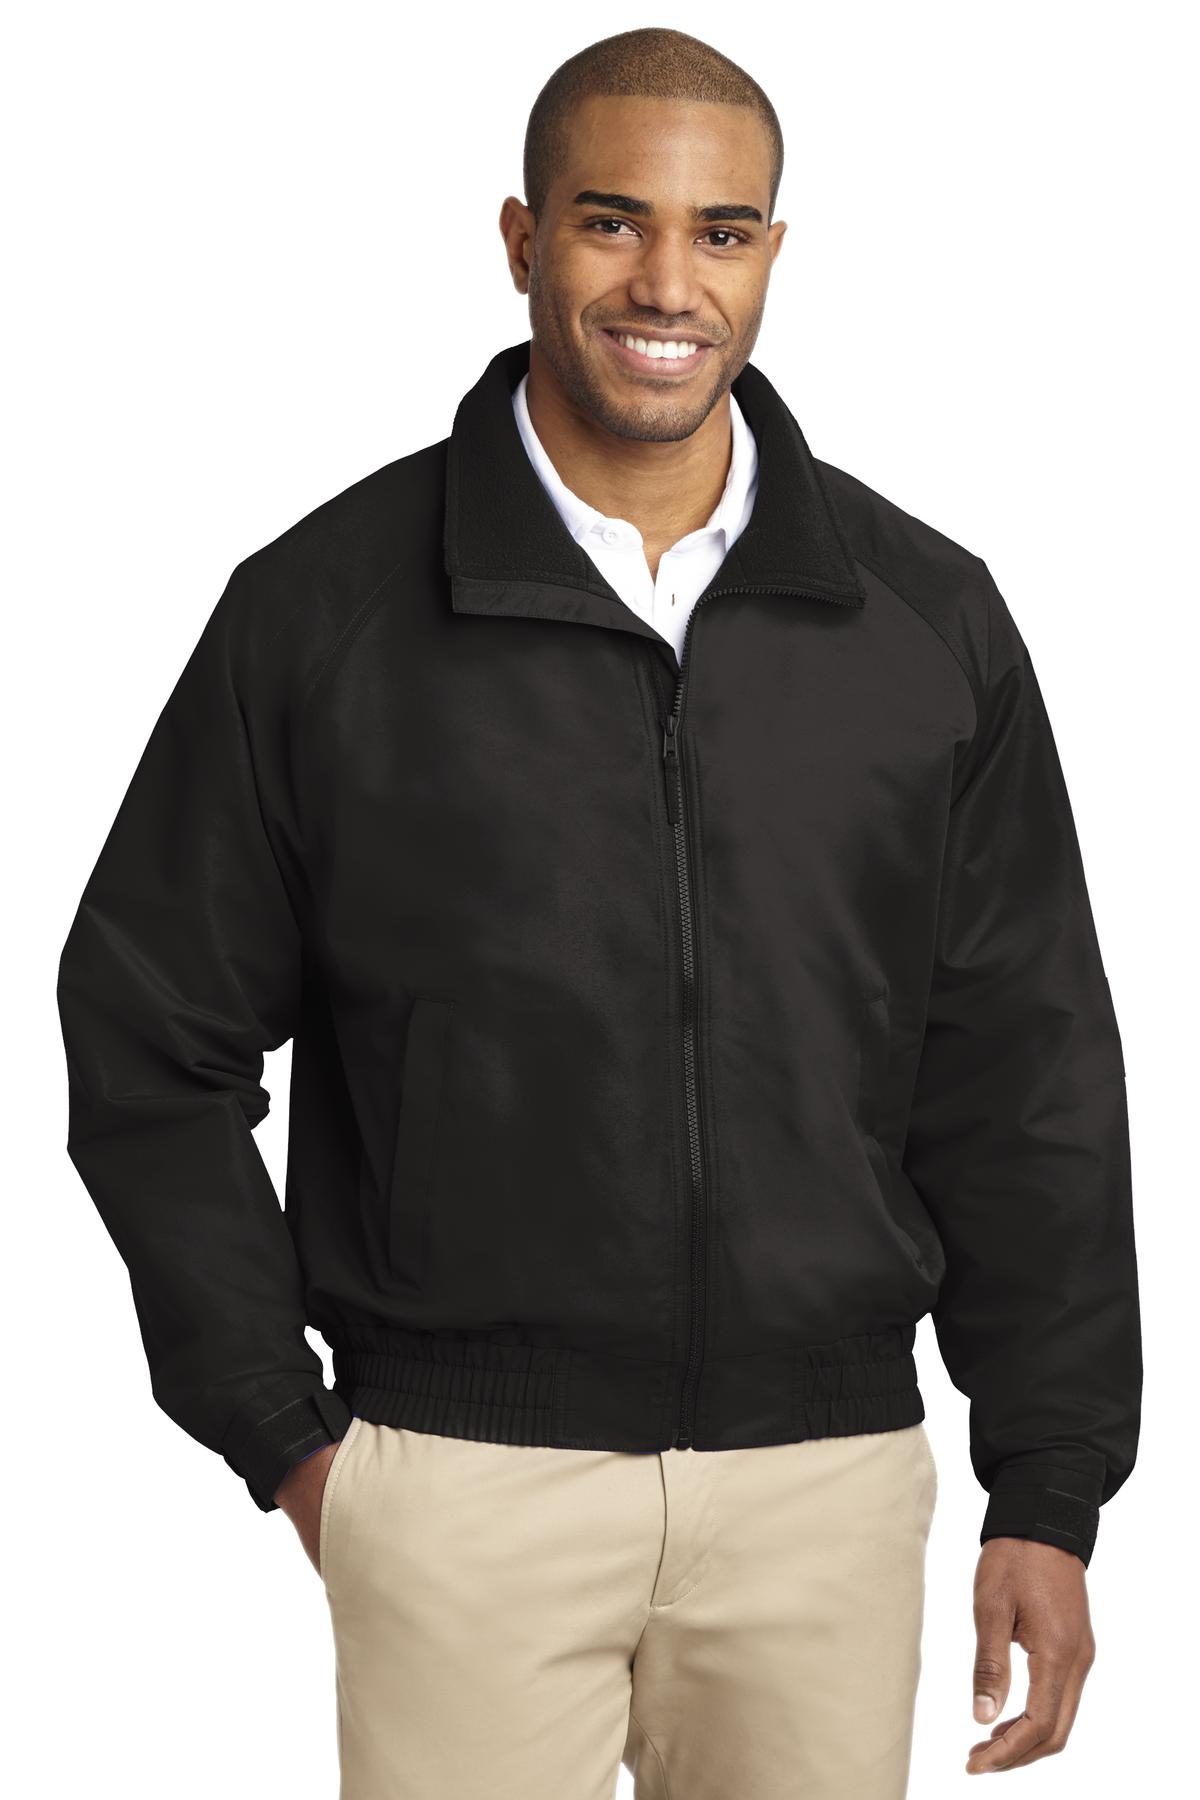 Port Authority Lightweight Charger Jacket-XL (True Black) - image 1 of 5